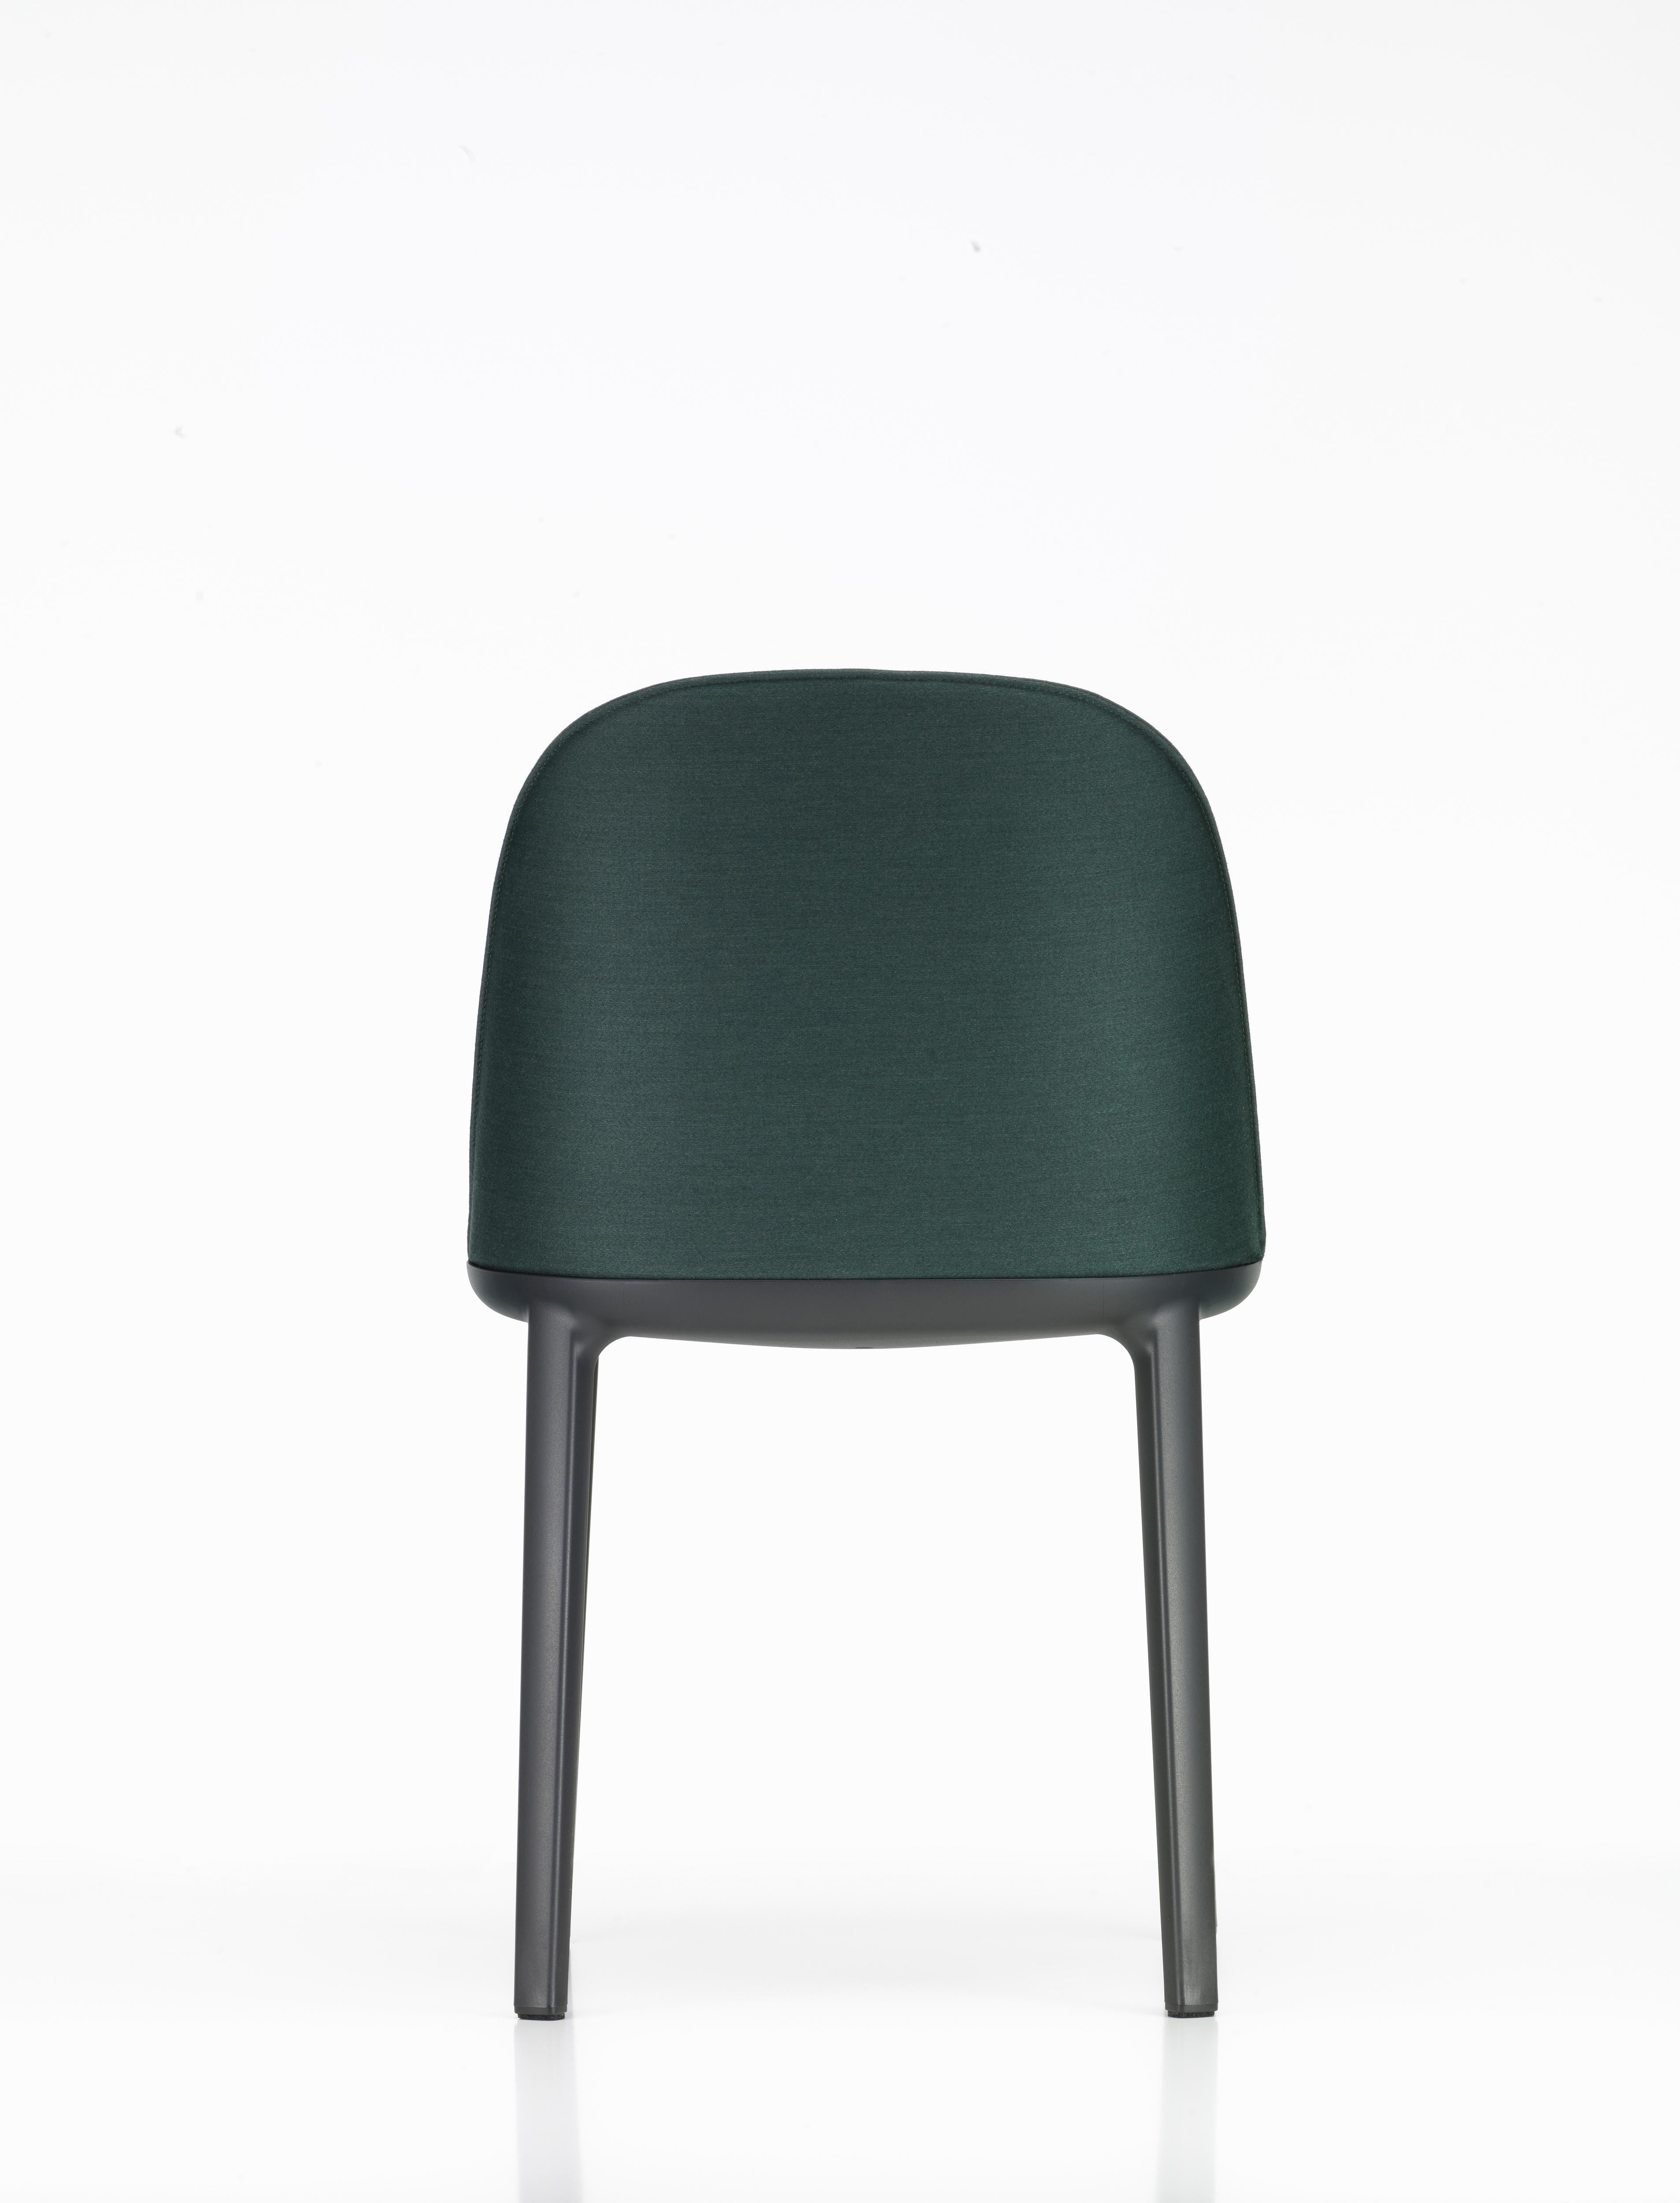 Vitra Softshell Side Chair in Hunter Green Aura by Ronan & Erwan Bouroullec In New Condition For Sale In New York, NY